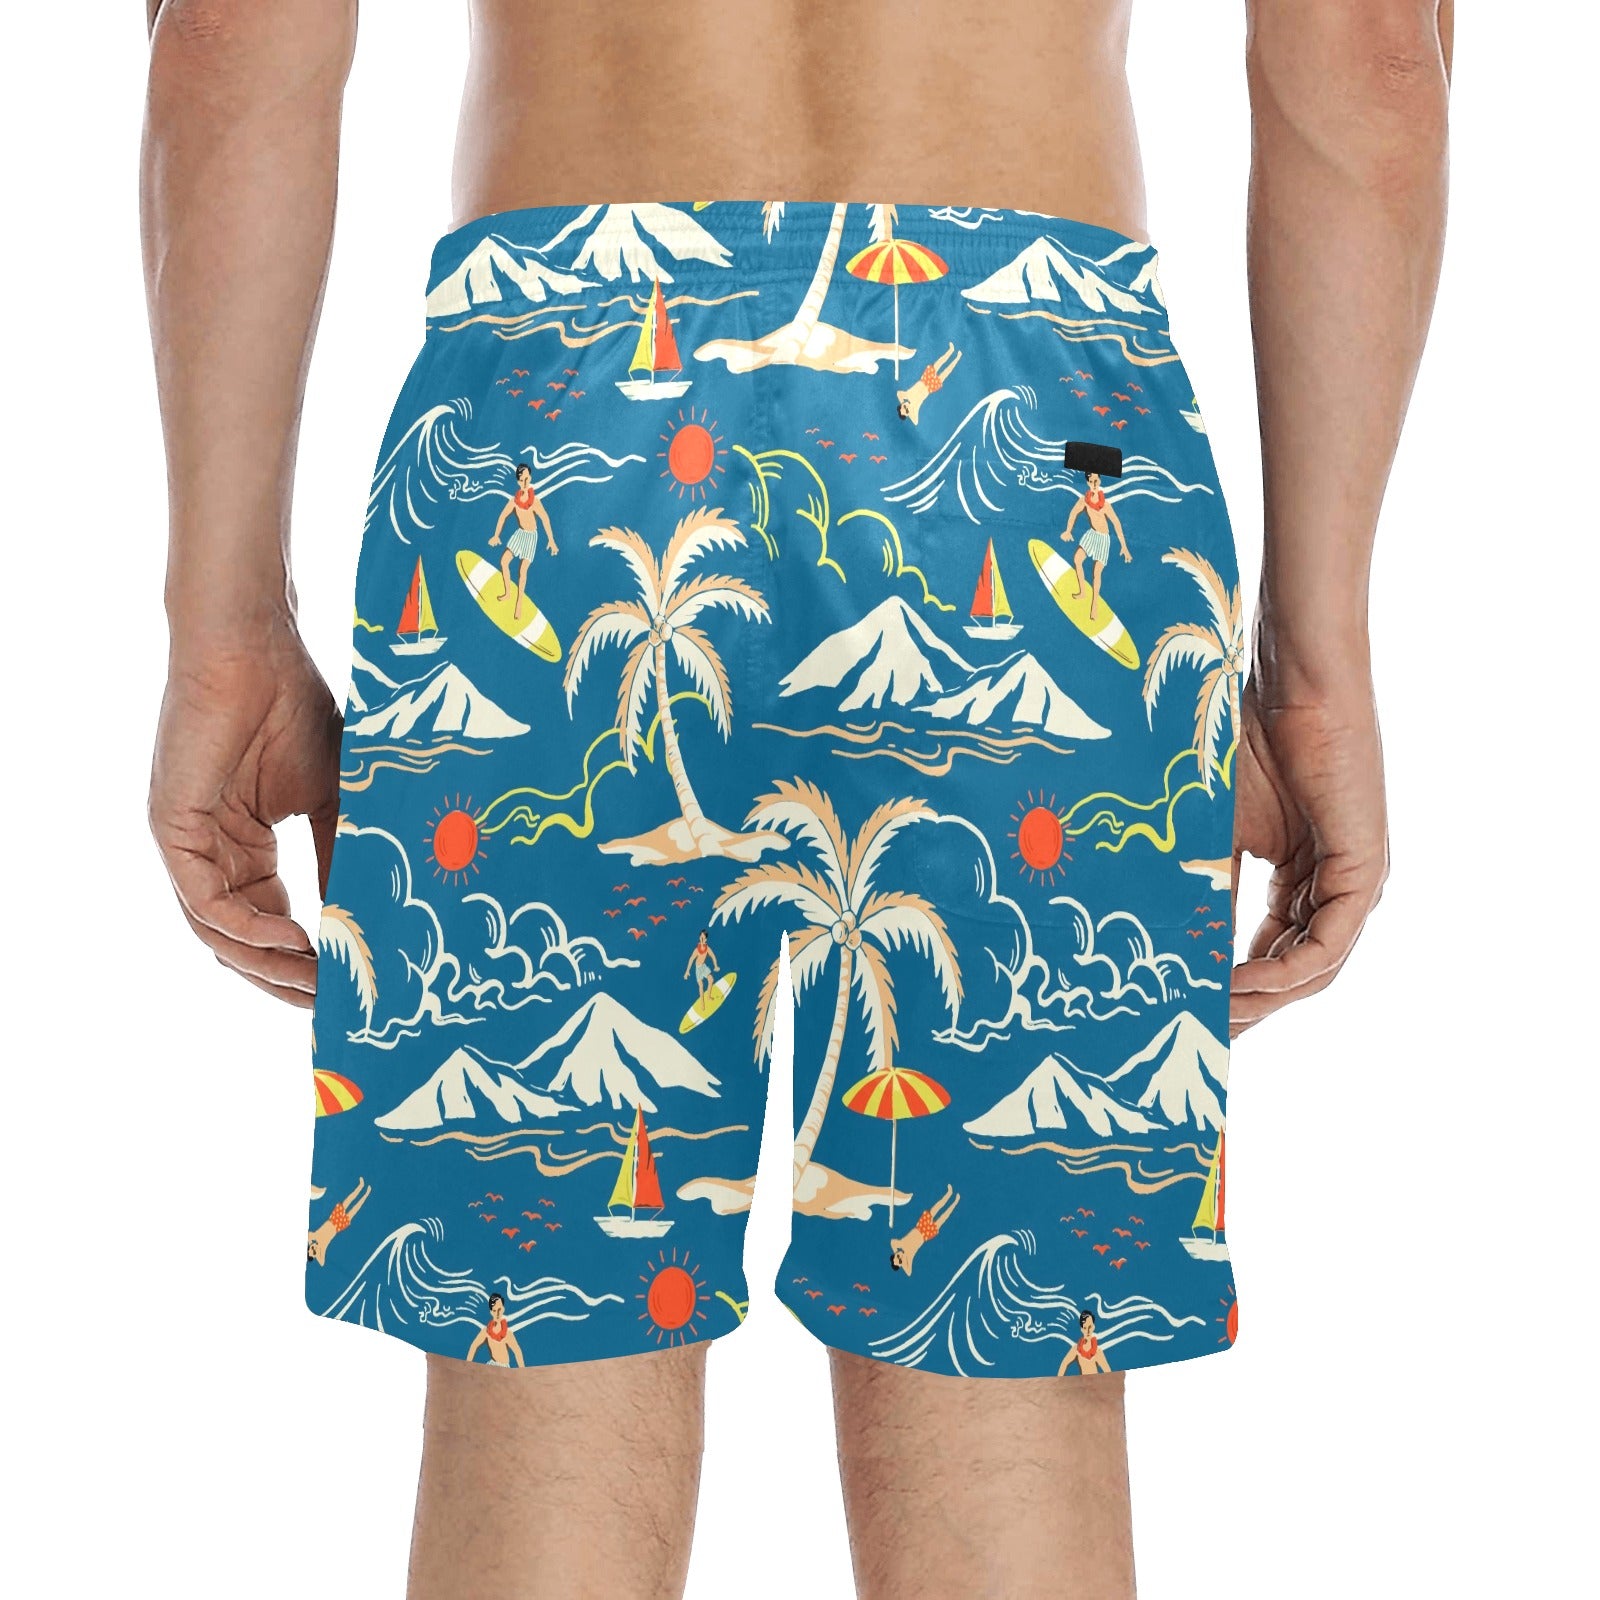 Tropical Island Men Mid Length Shorts, Beach Surf Mountain Swim Trunks Front and Back Pockets & Mesh Drawstring Boys Bathing Suit Summer Starcove Fashion